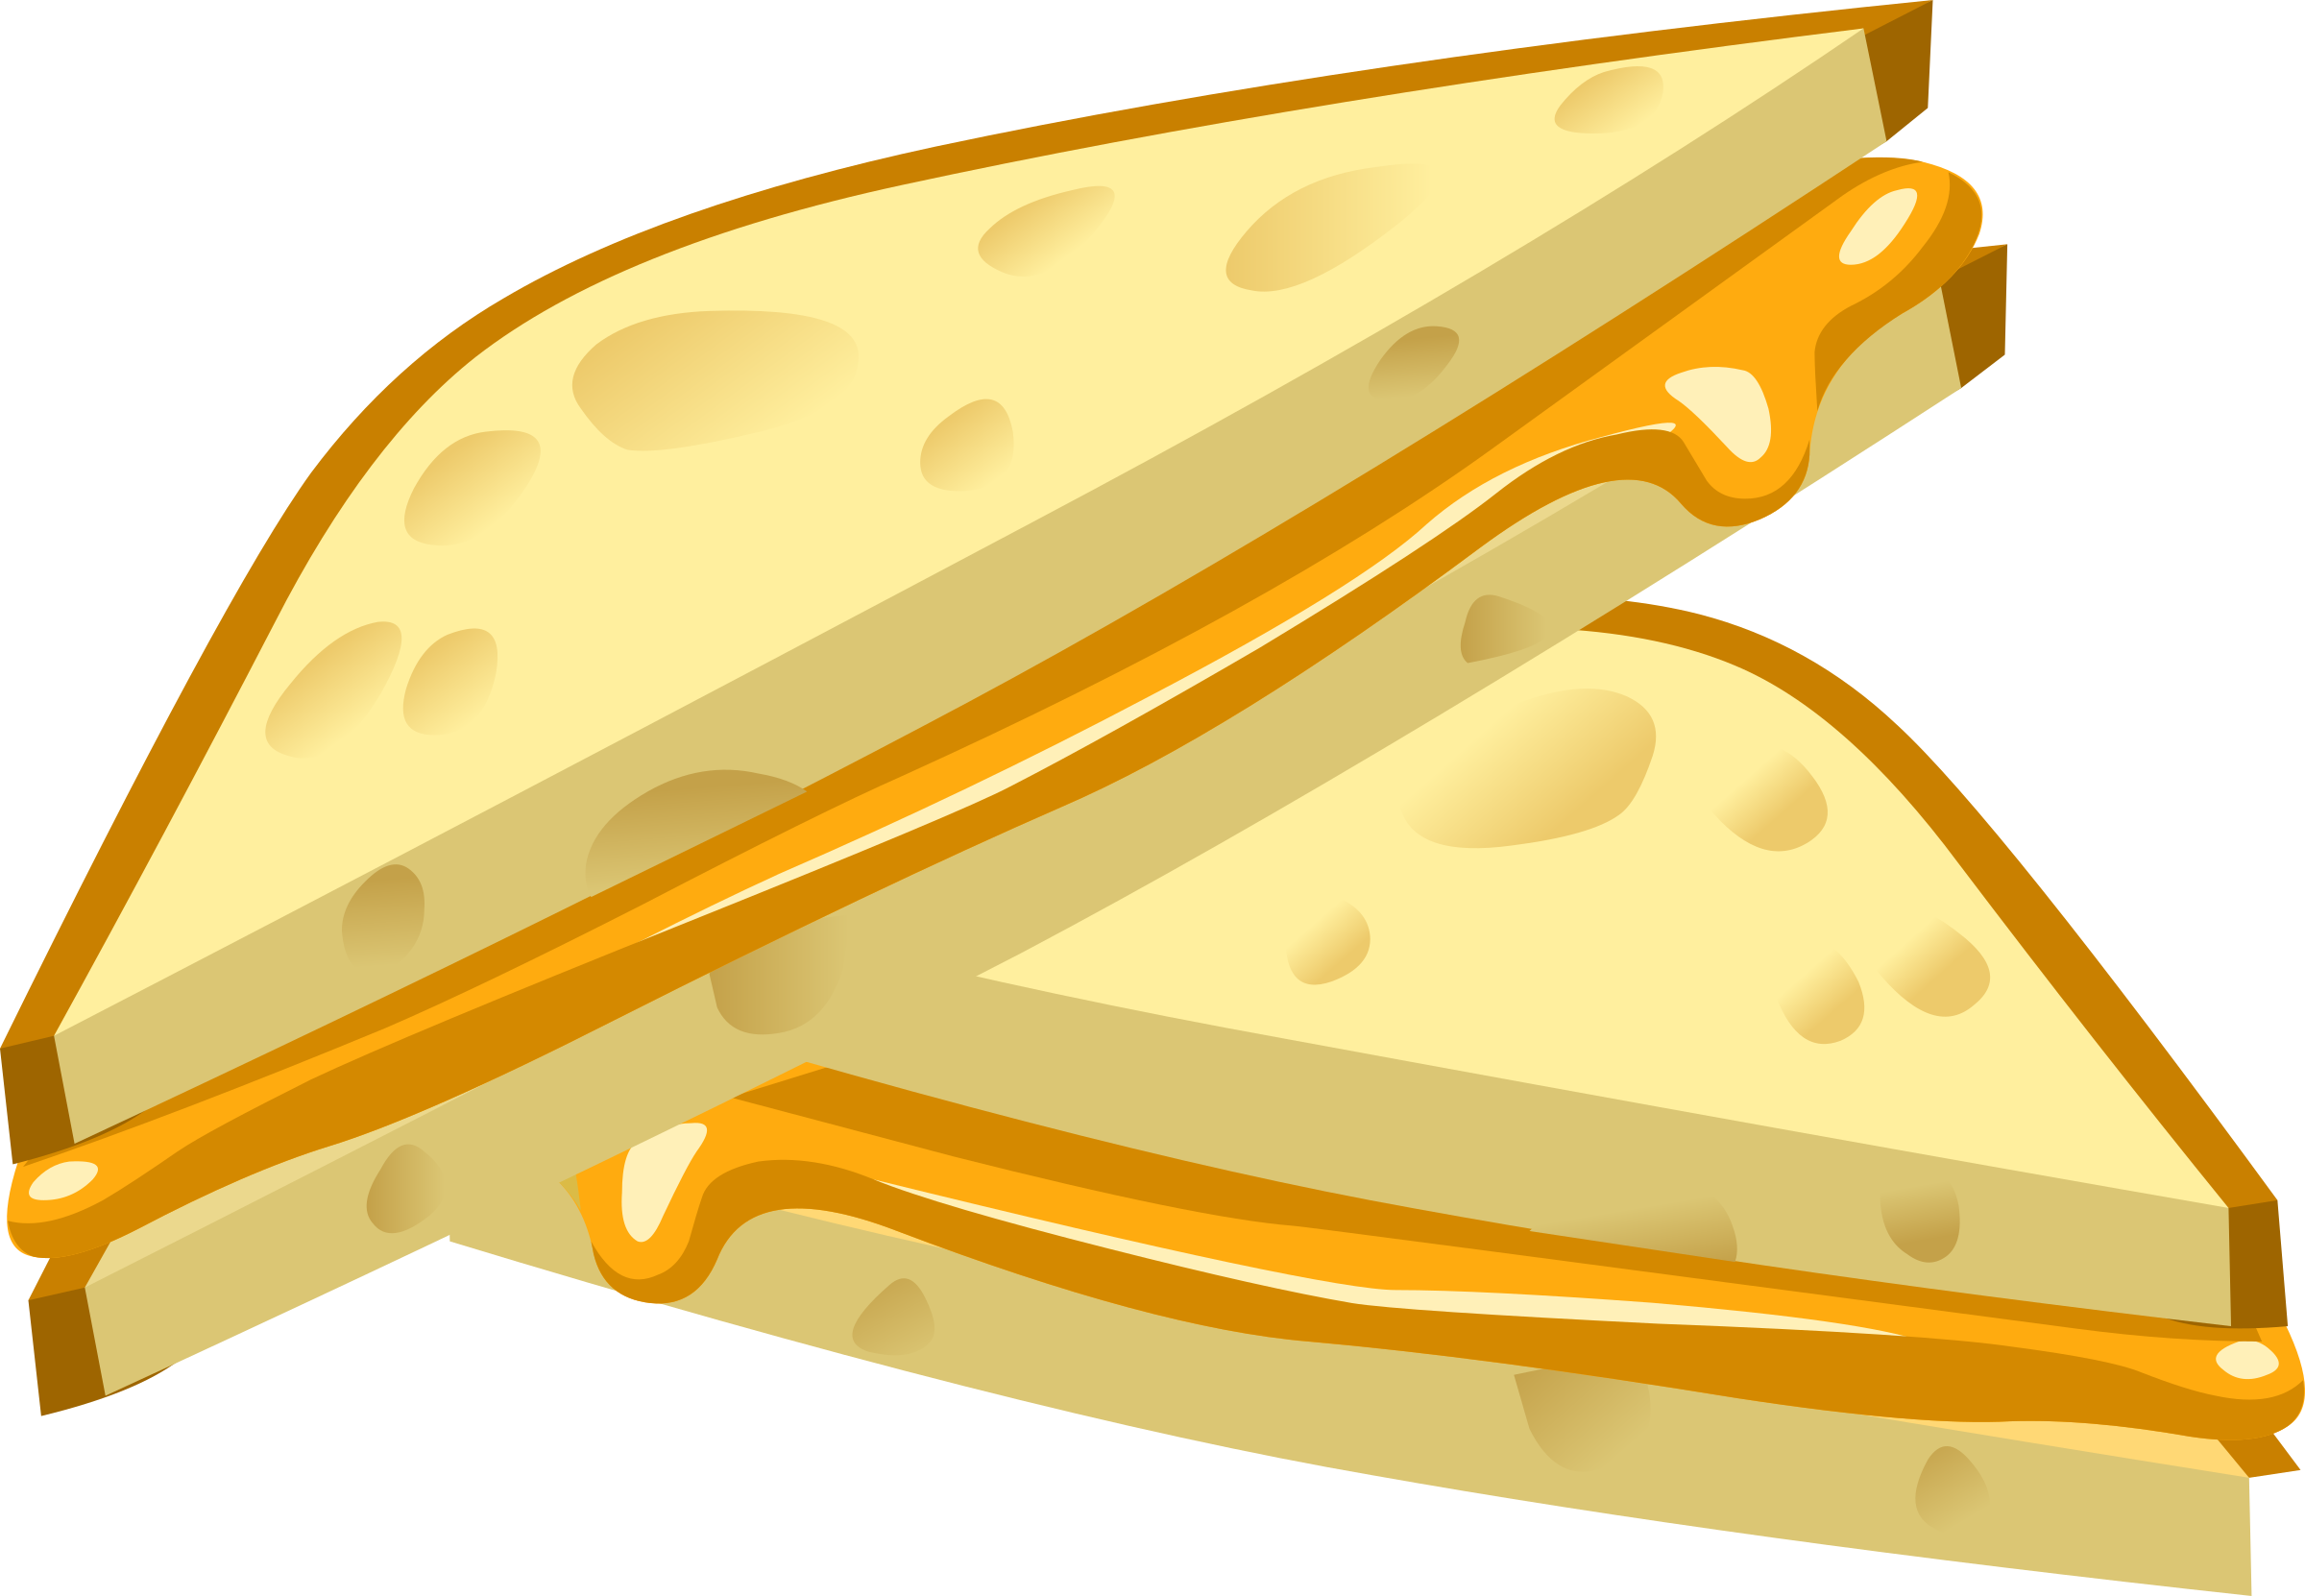 Food Grilled Cheese - Grilled Cheese Sandwich Cartoon (2400x1662)